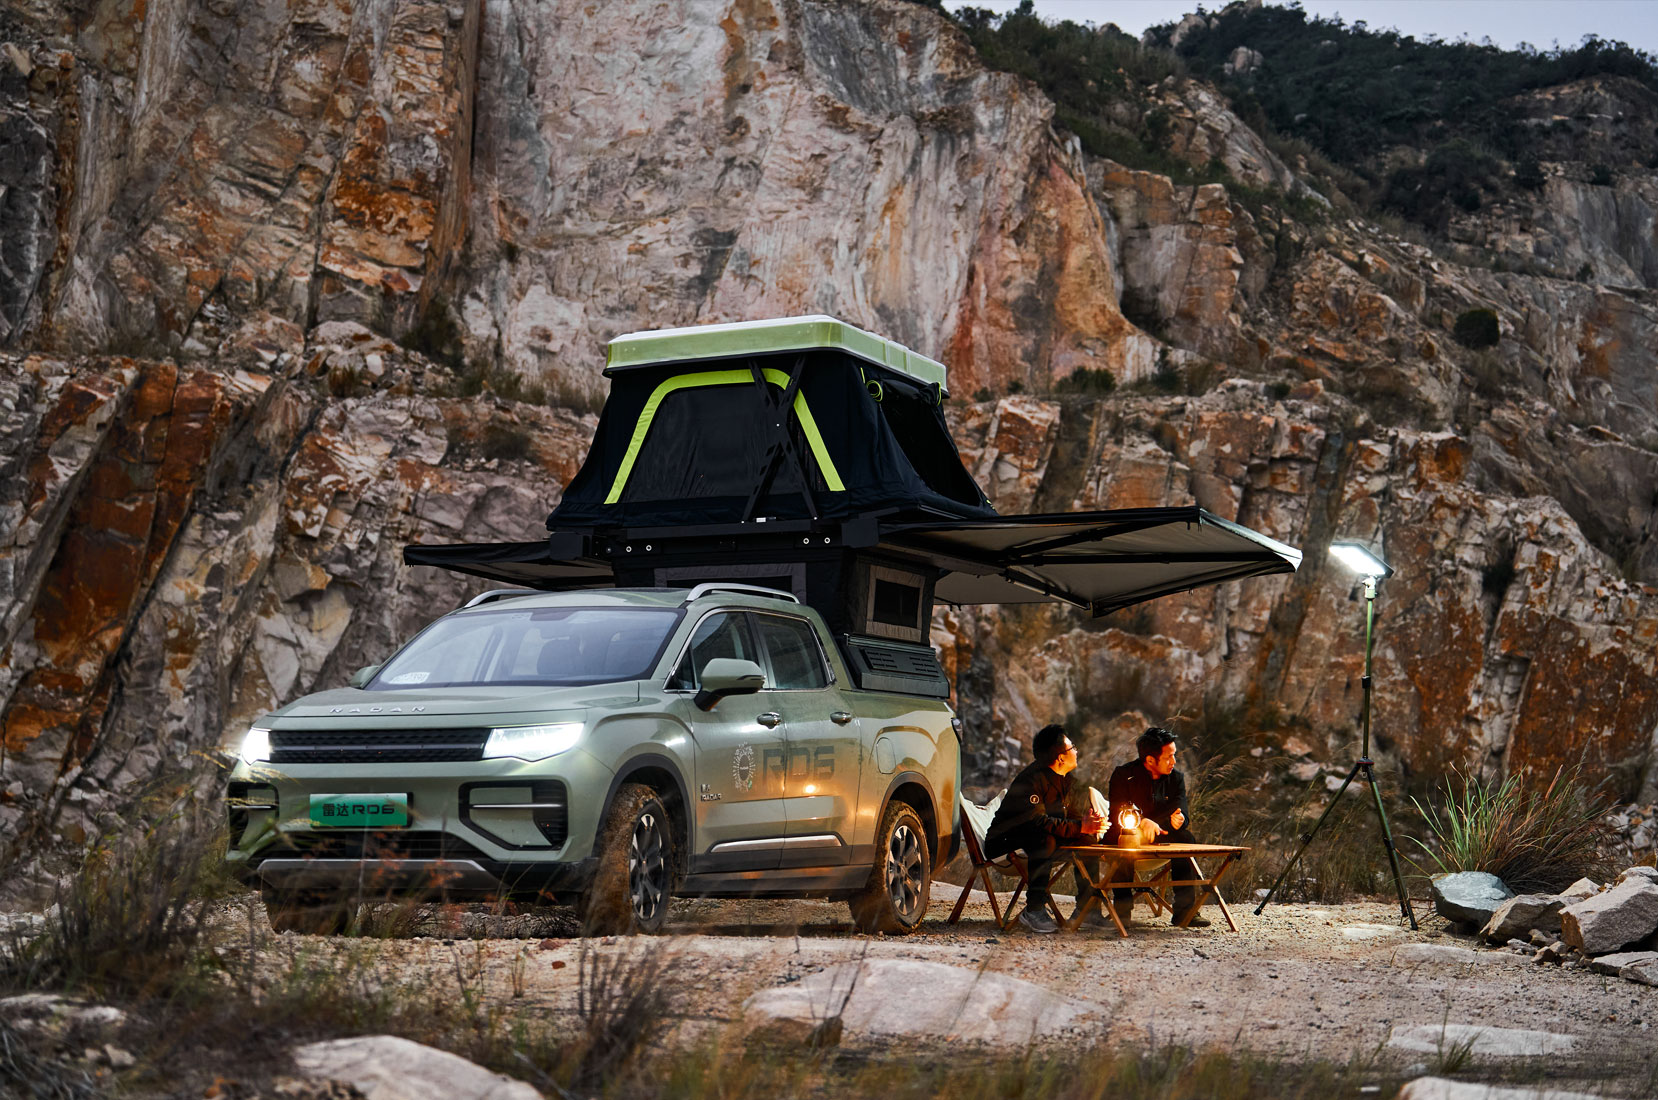 Radar EV Teams up with Wild Land to Create A Camping Ecology, and A New Car Roof Tent is Unveiled!